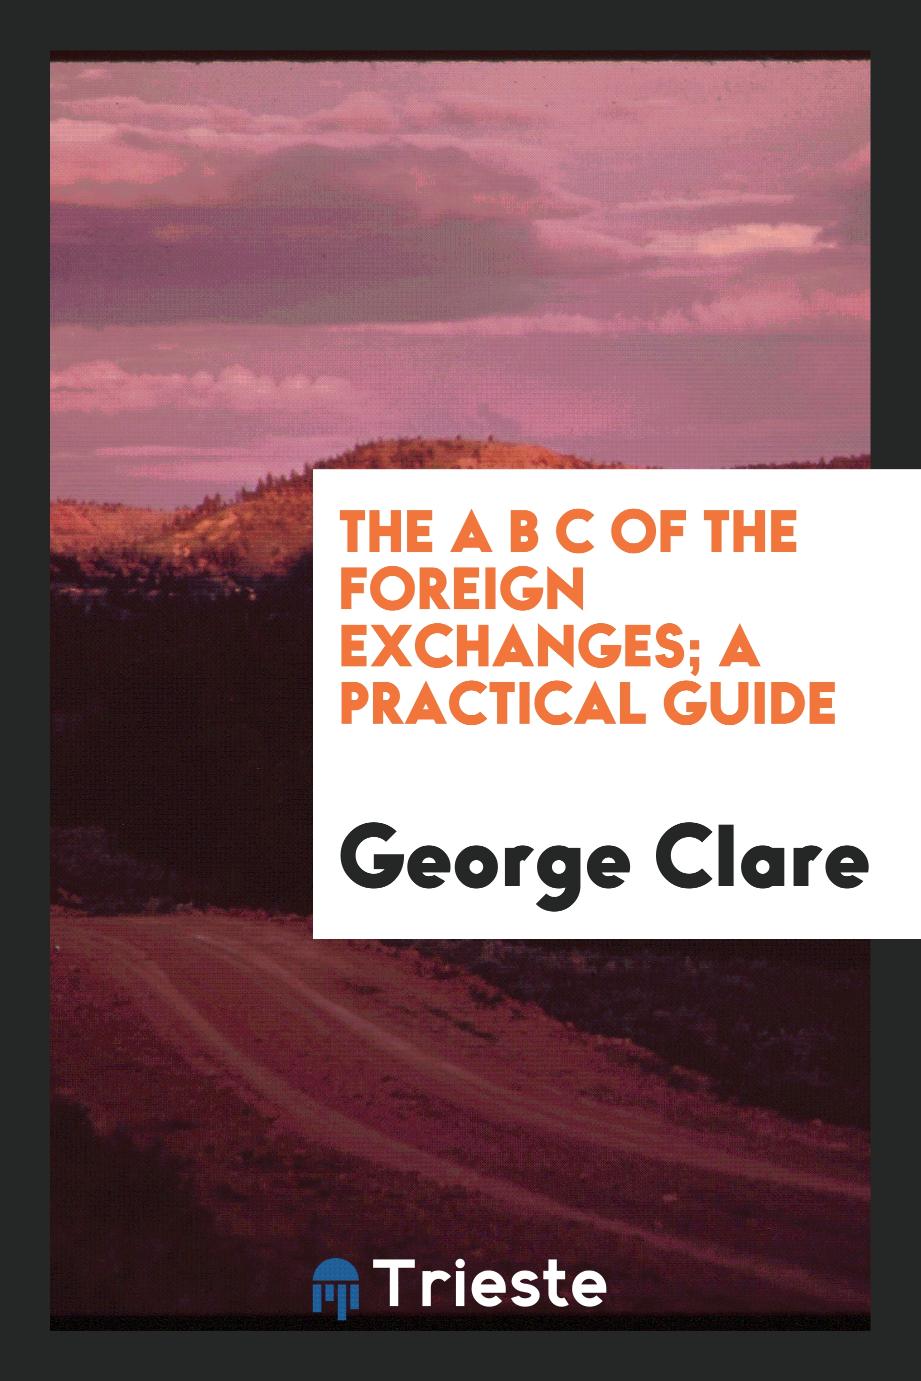 The A B C of the foreign exchanges; a practical guide